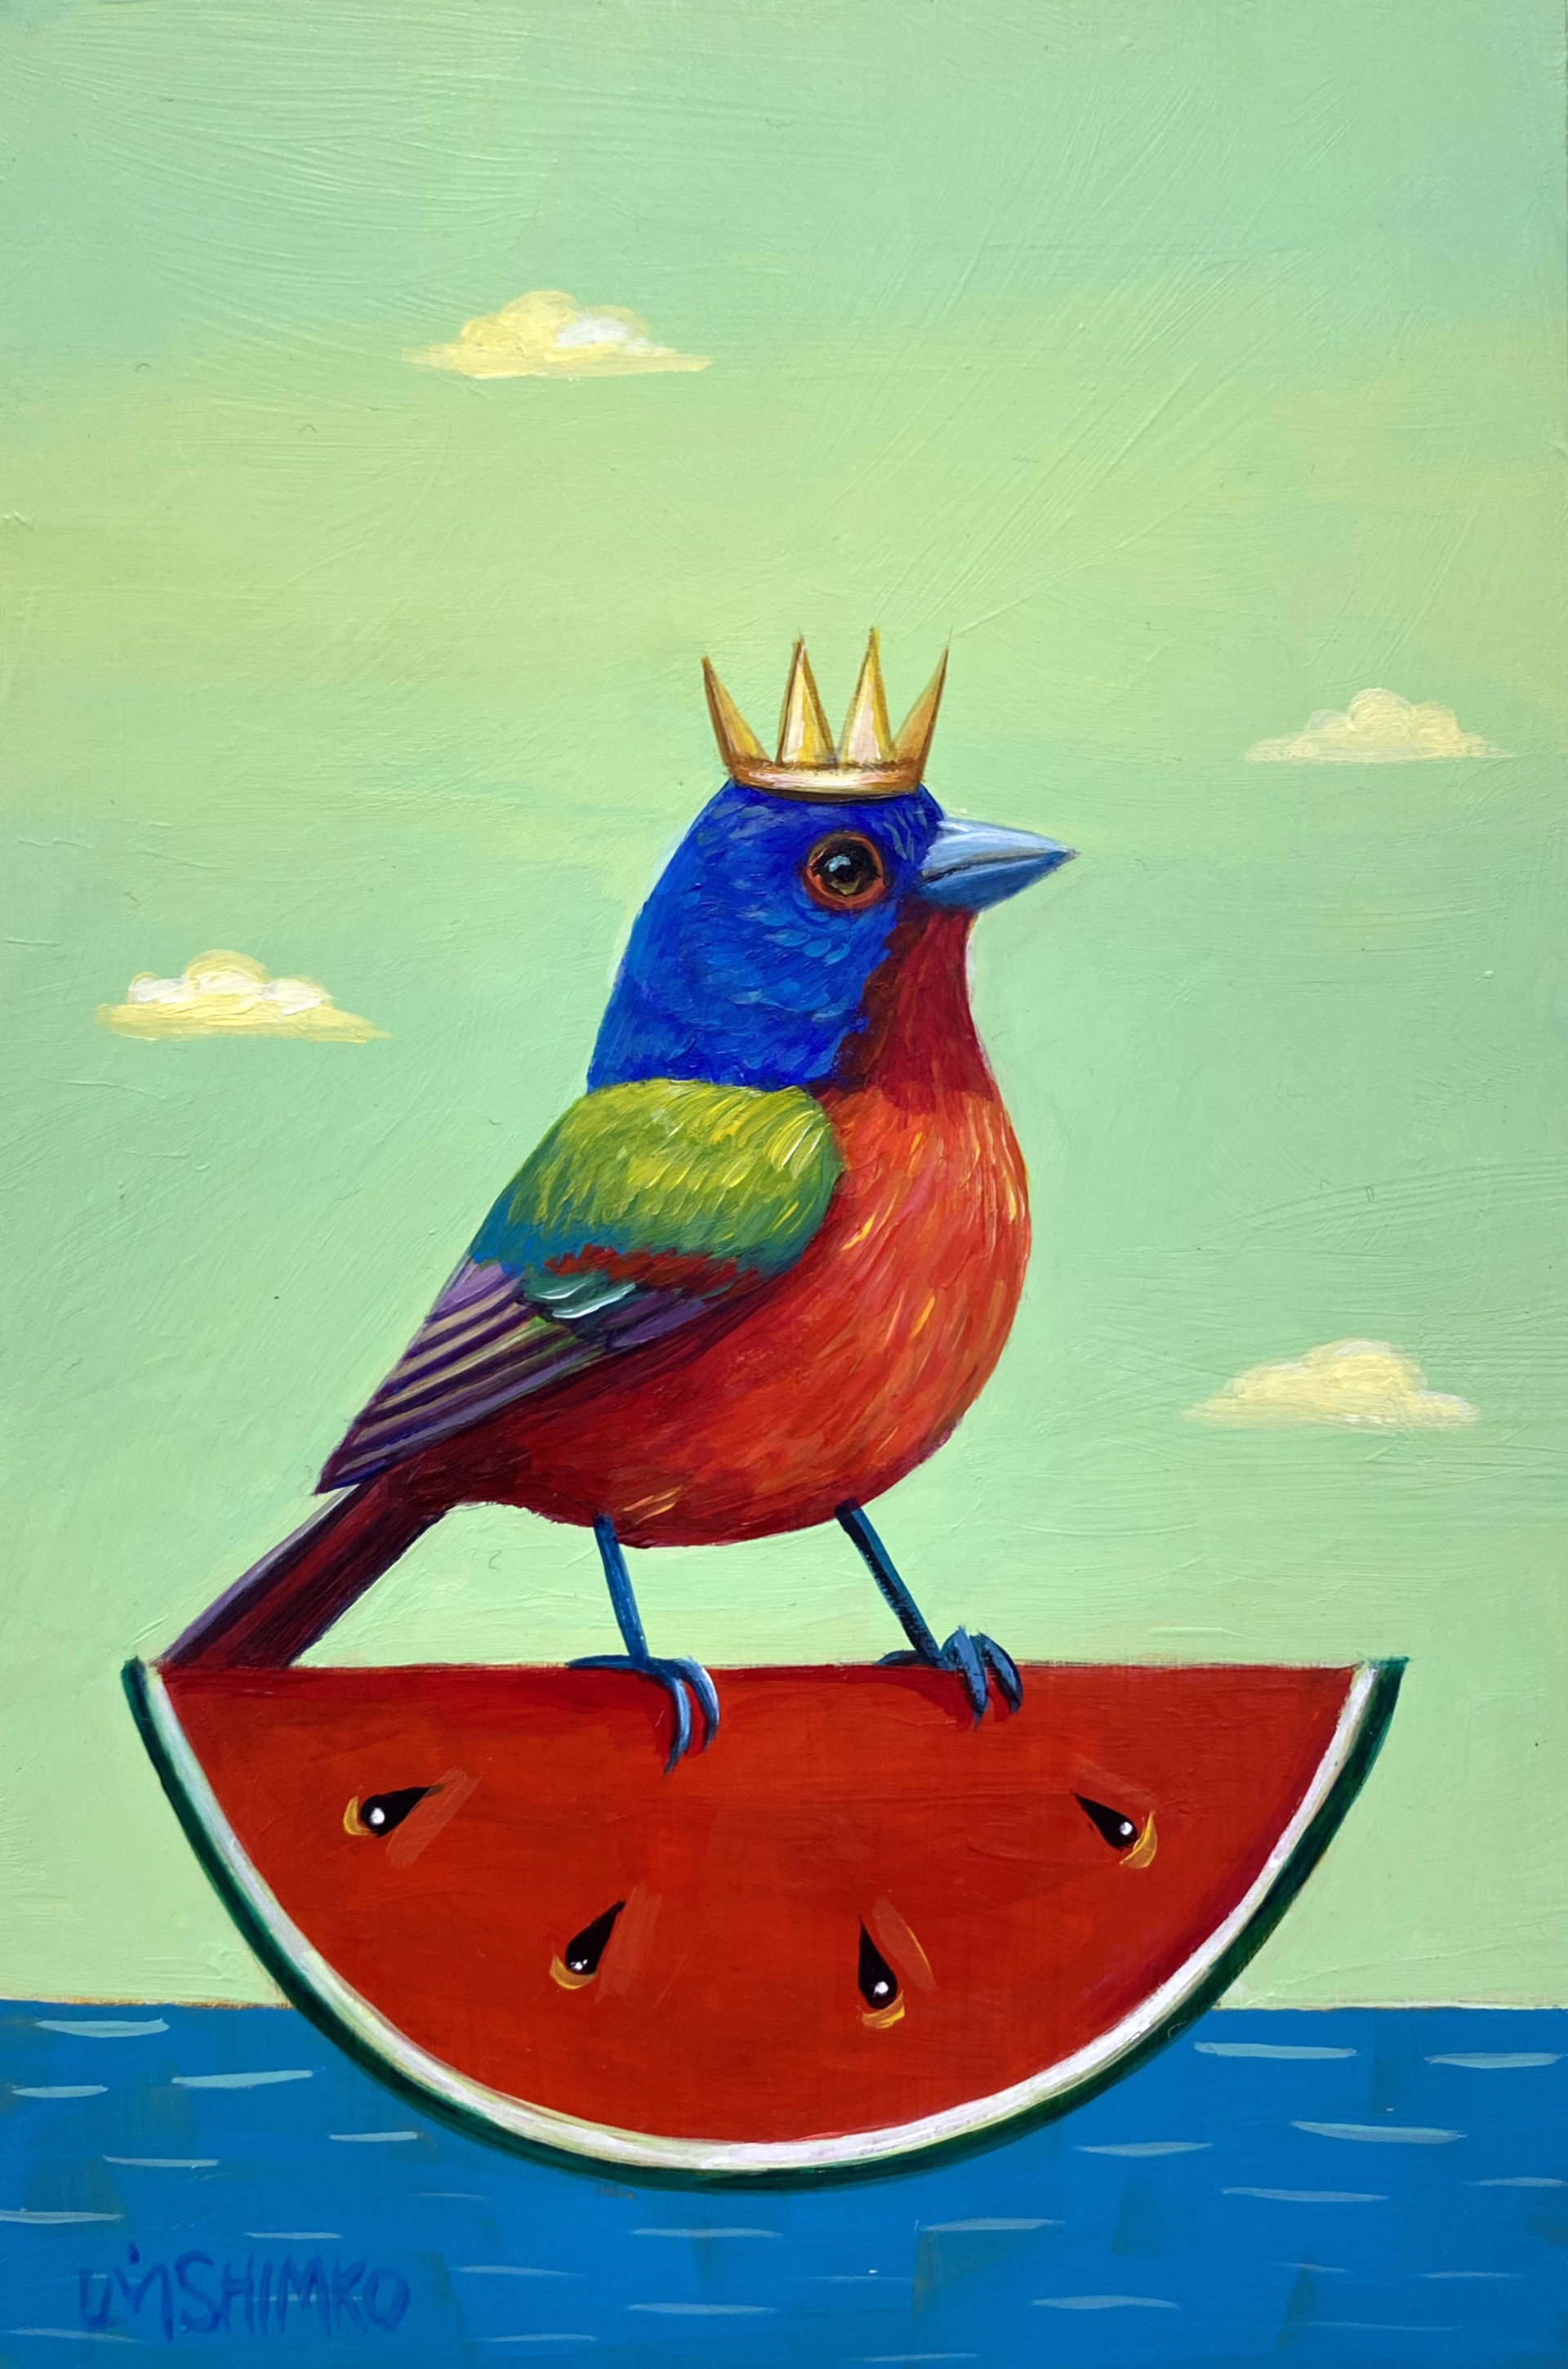 Mister Painted Bunting Watermelon by Lisa Shimko